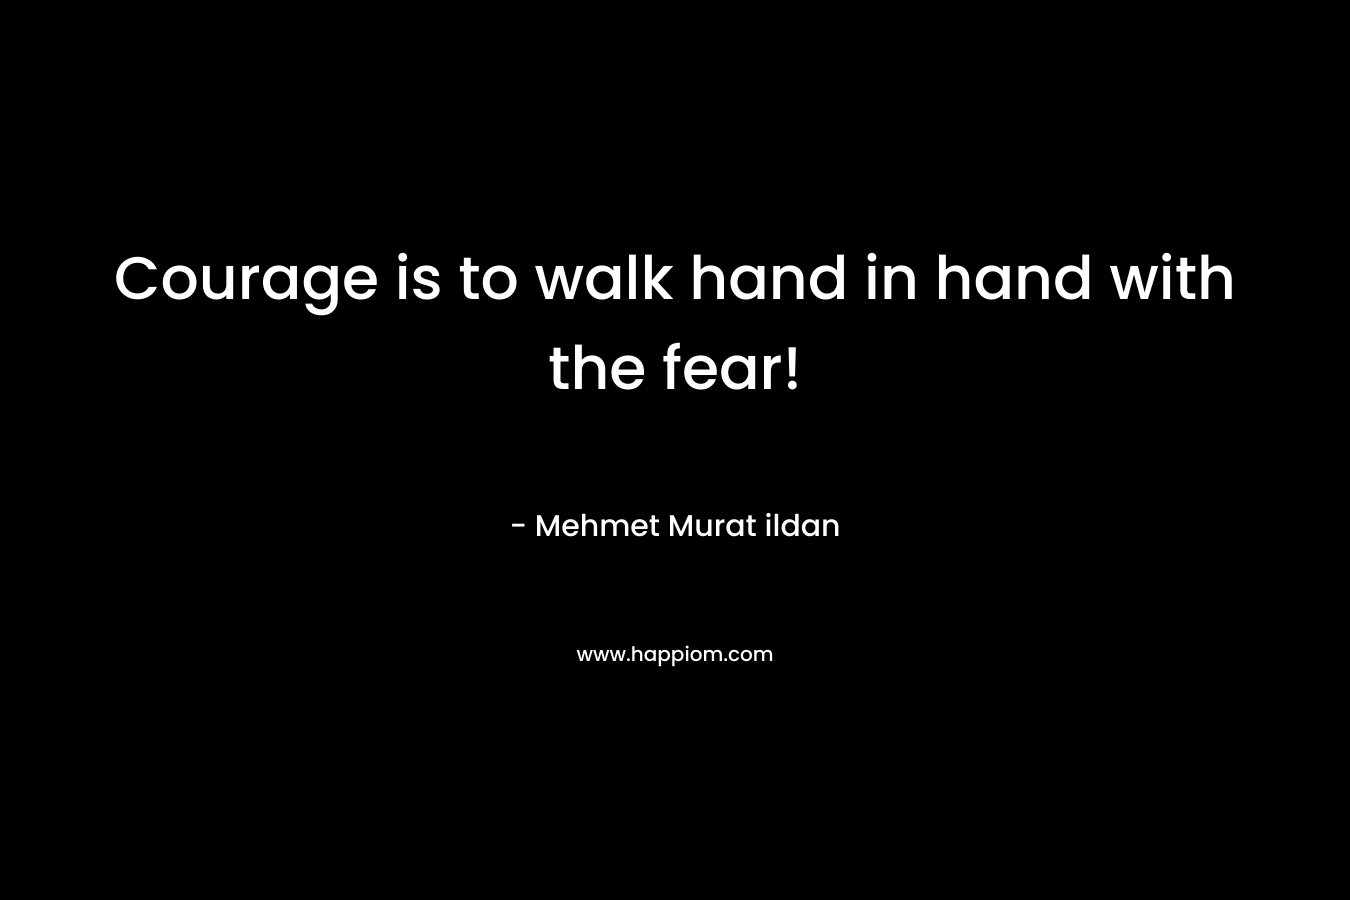 Courage is to walk hand in hand with the fear!